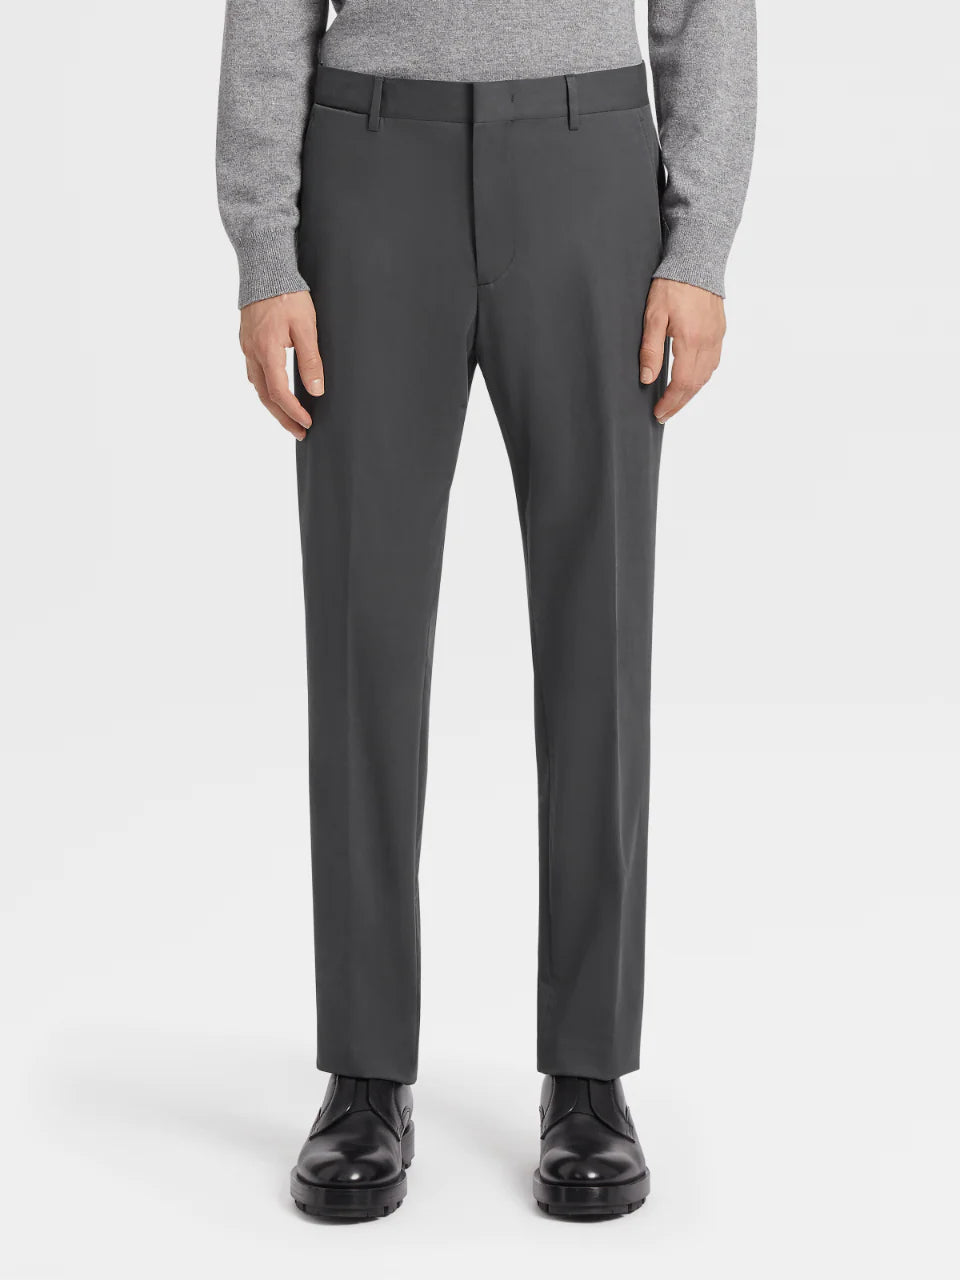 Zegna Sport Trousers in Charcoal